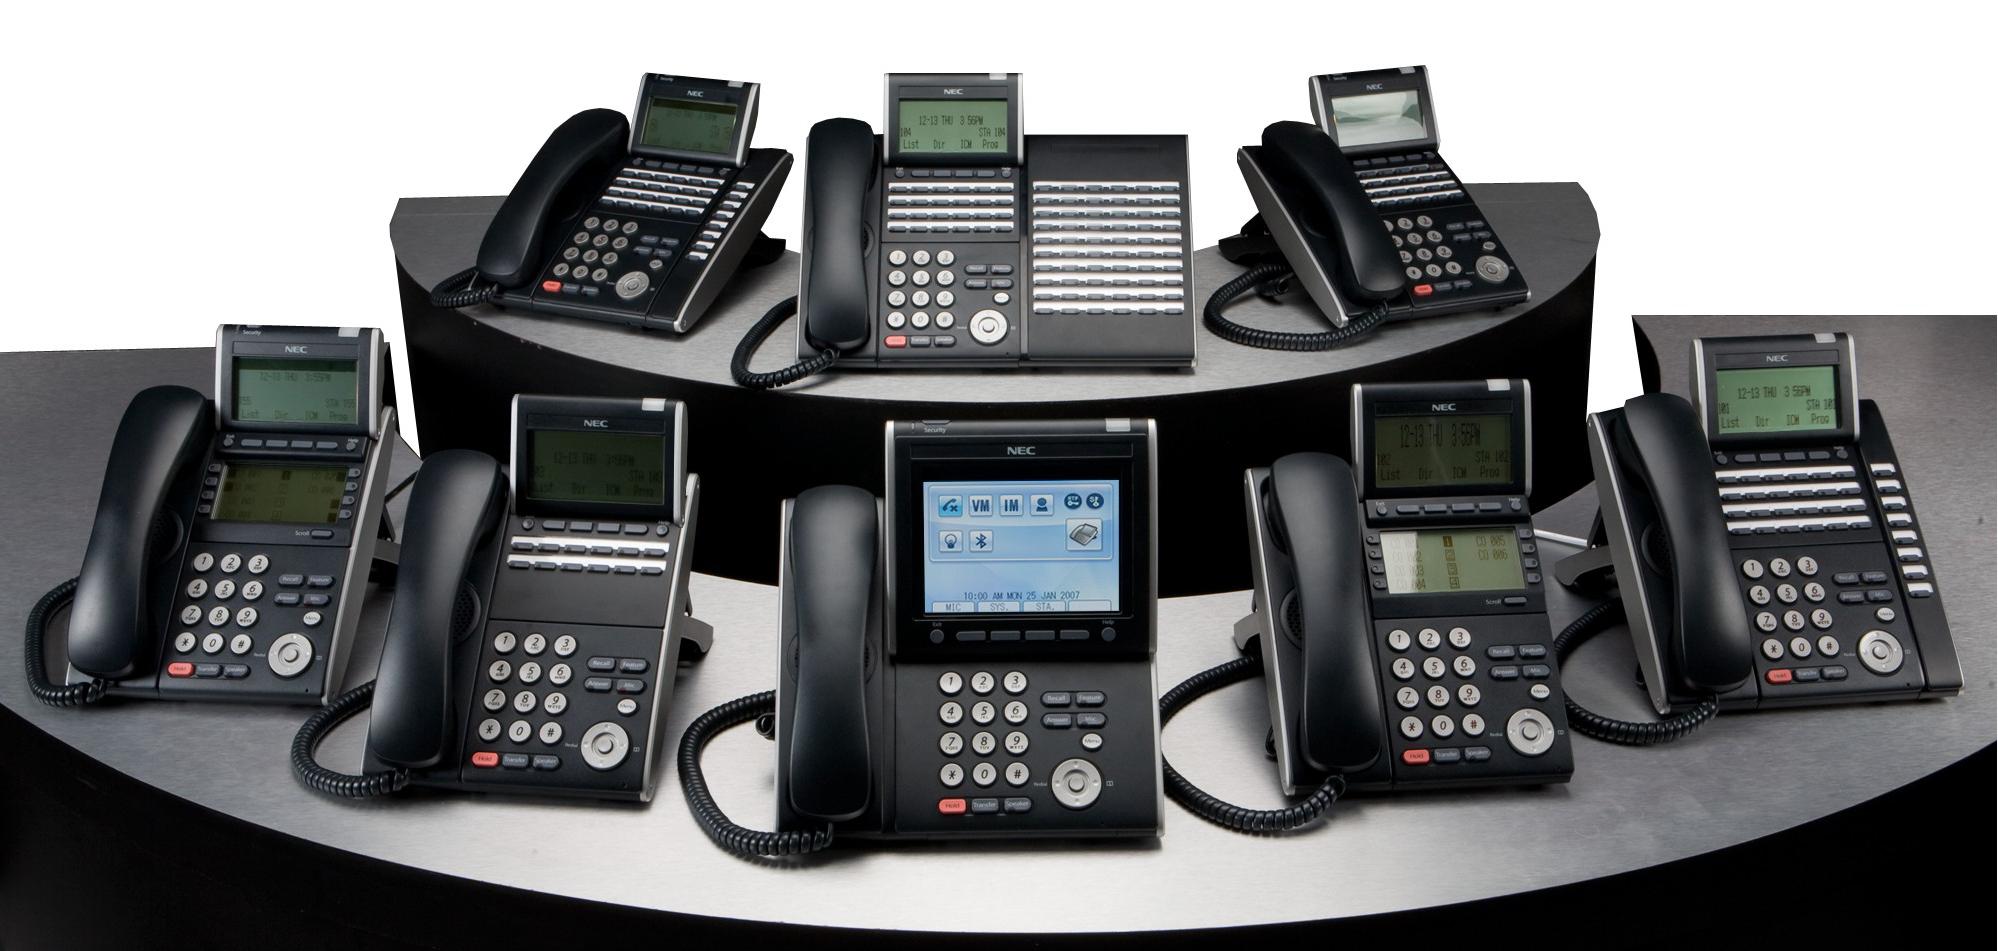 Benefits of Using a VOIP Phone System in Your Business